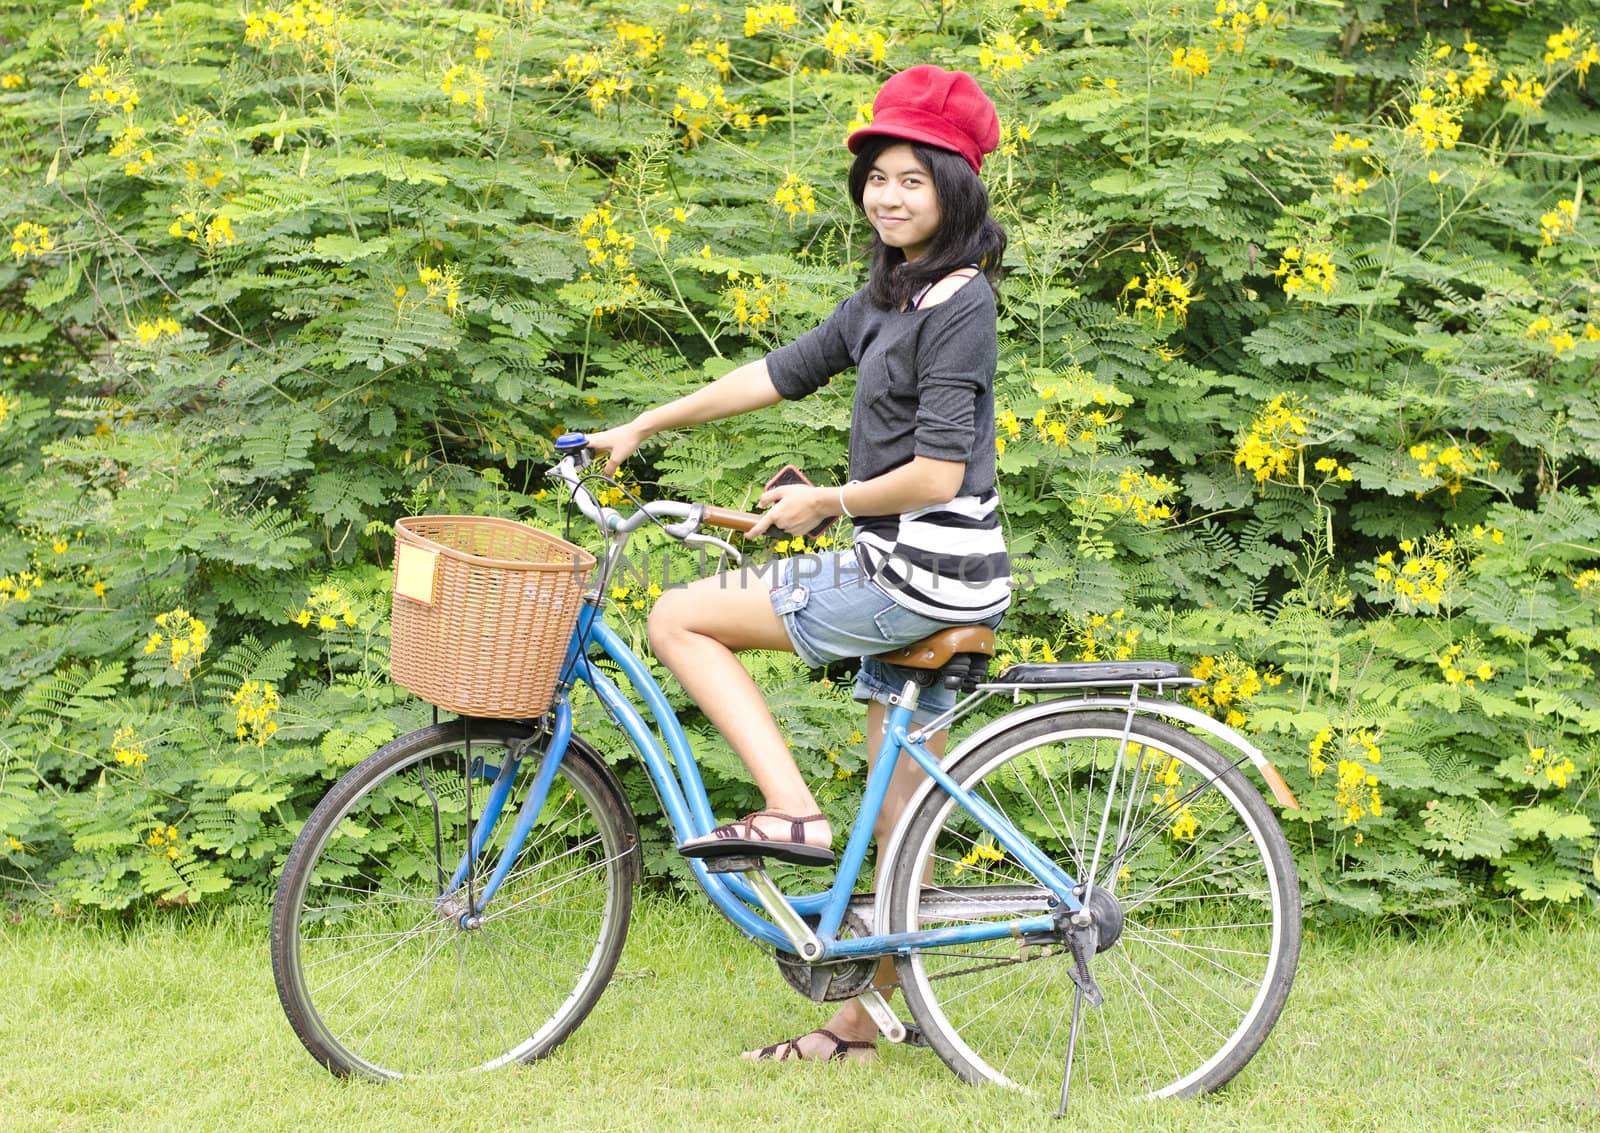 Pretty young woman with bicycle in a park smiling by siraanamwong